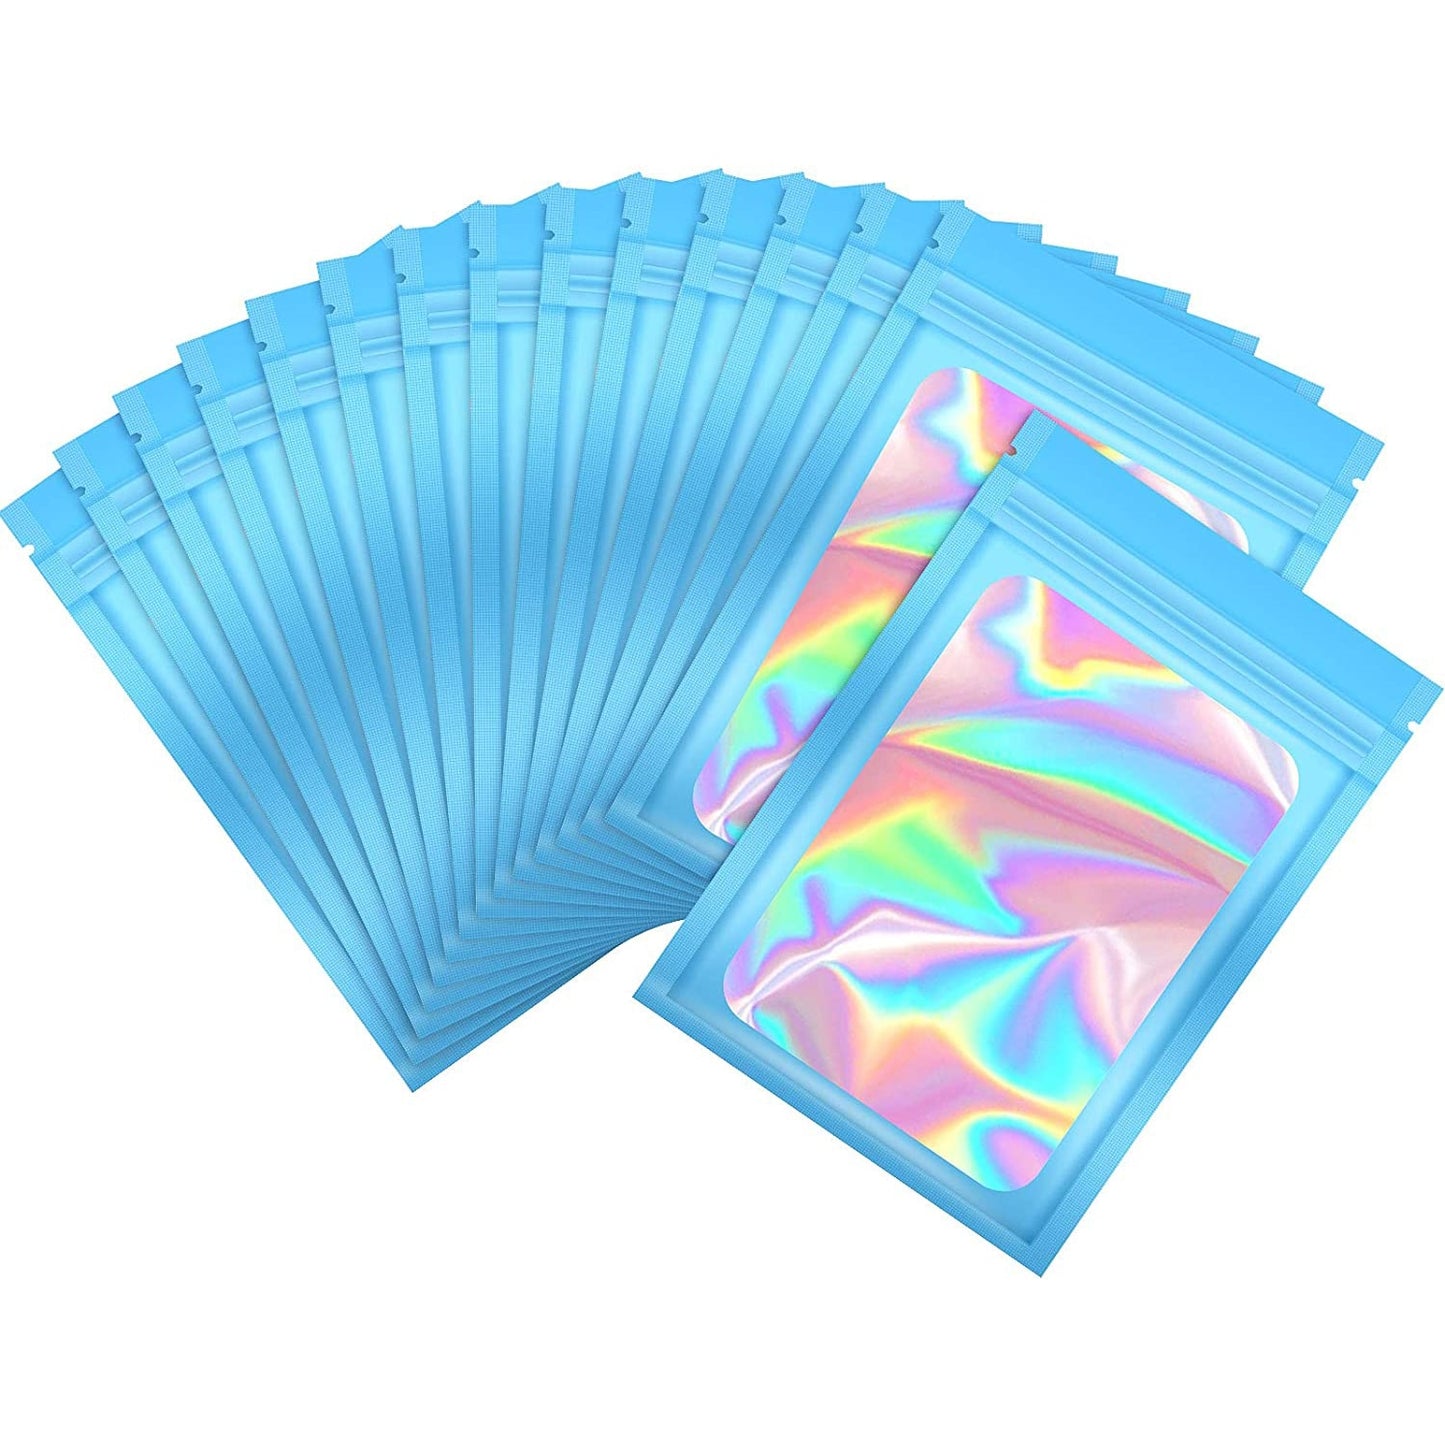 100 Pc Smell Proof Mylar Bags Resealable Odor Proof Bags Holographic Packaging Pouch Bag With Clear Window For Food